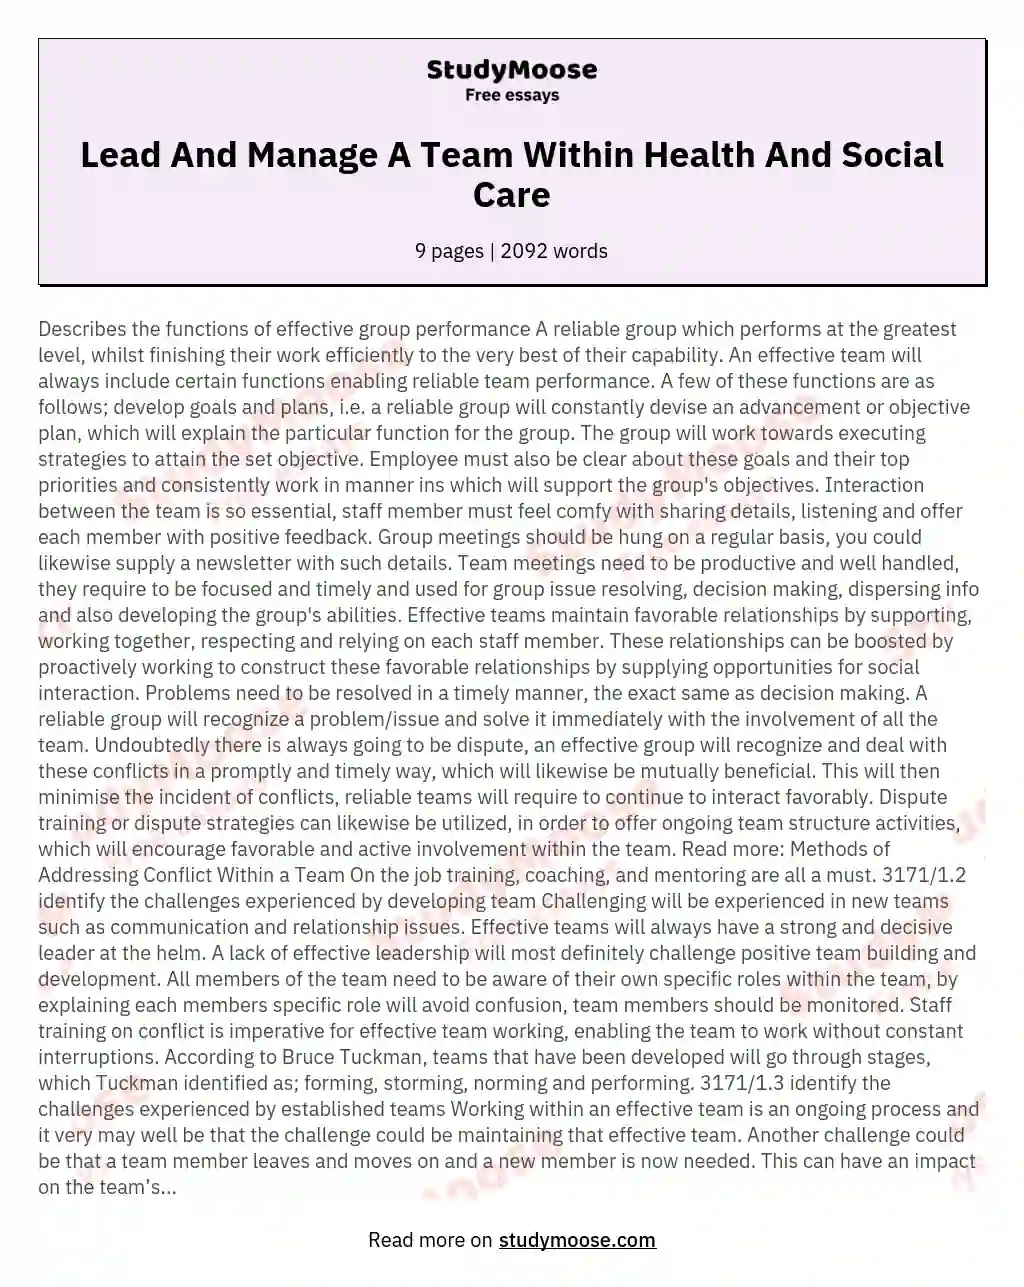 Lead And Manage A Team Within Health And Social Care essay